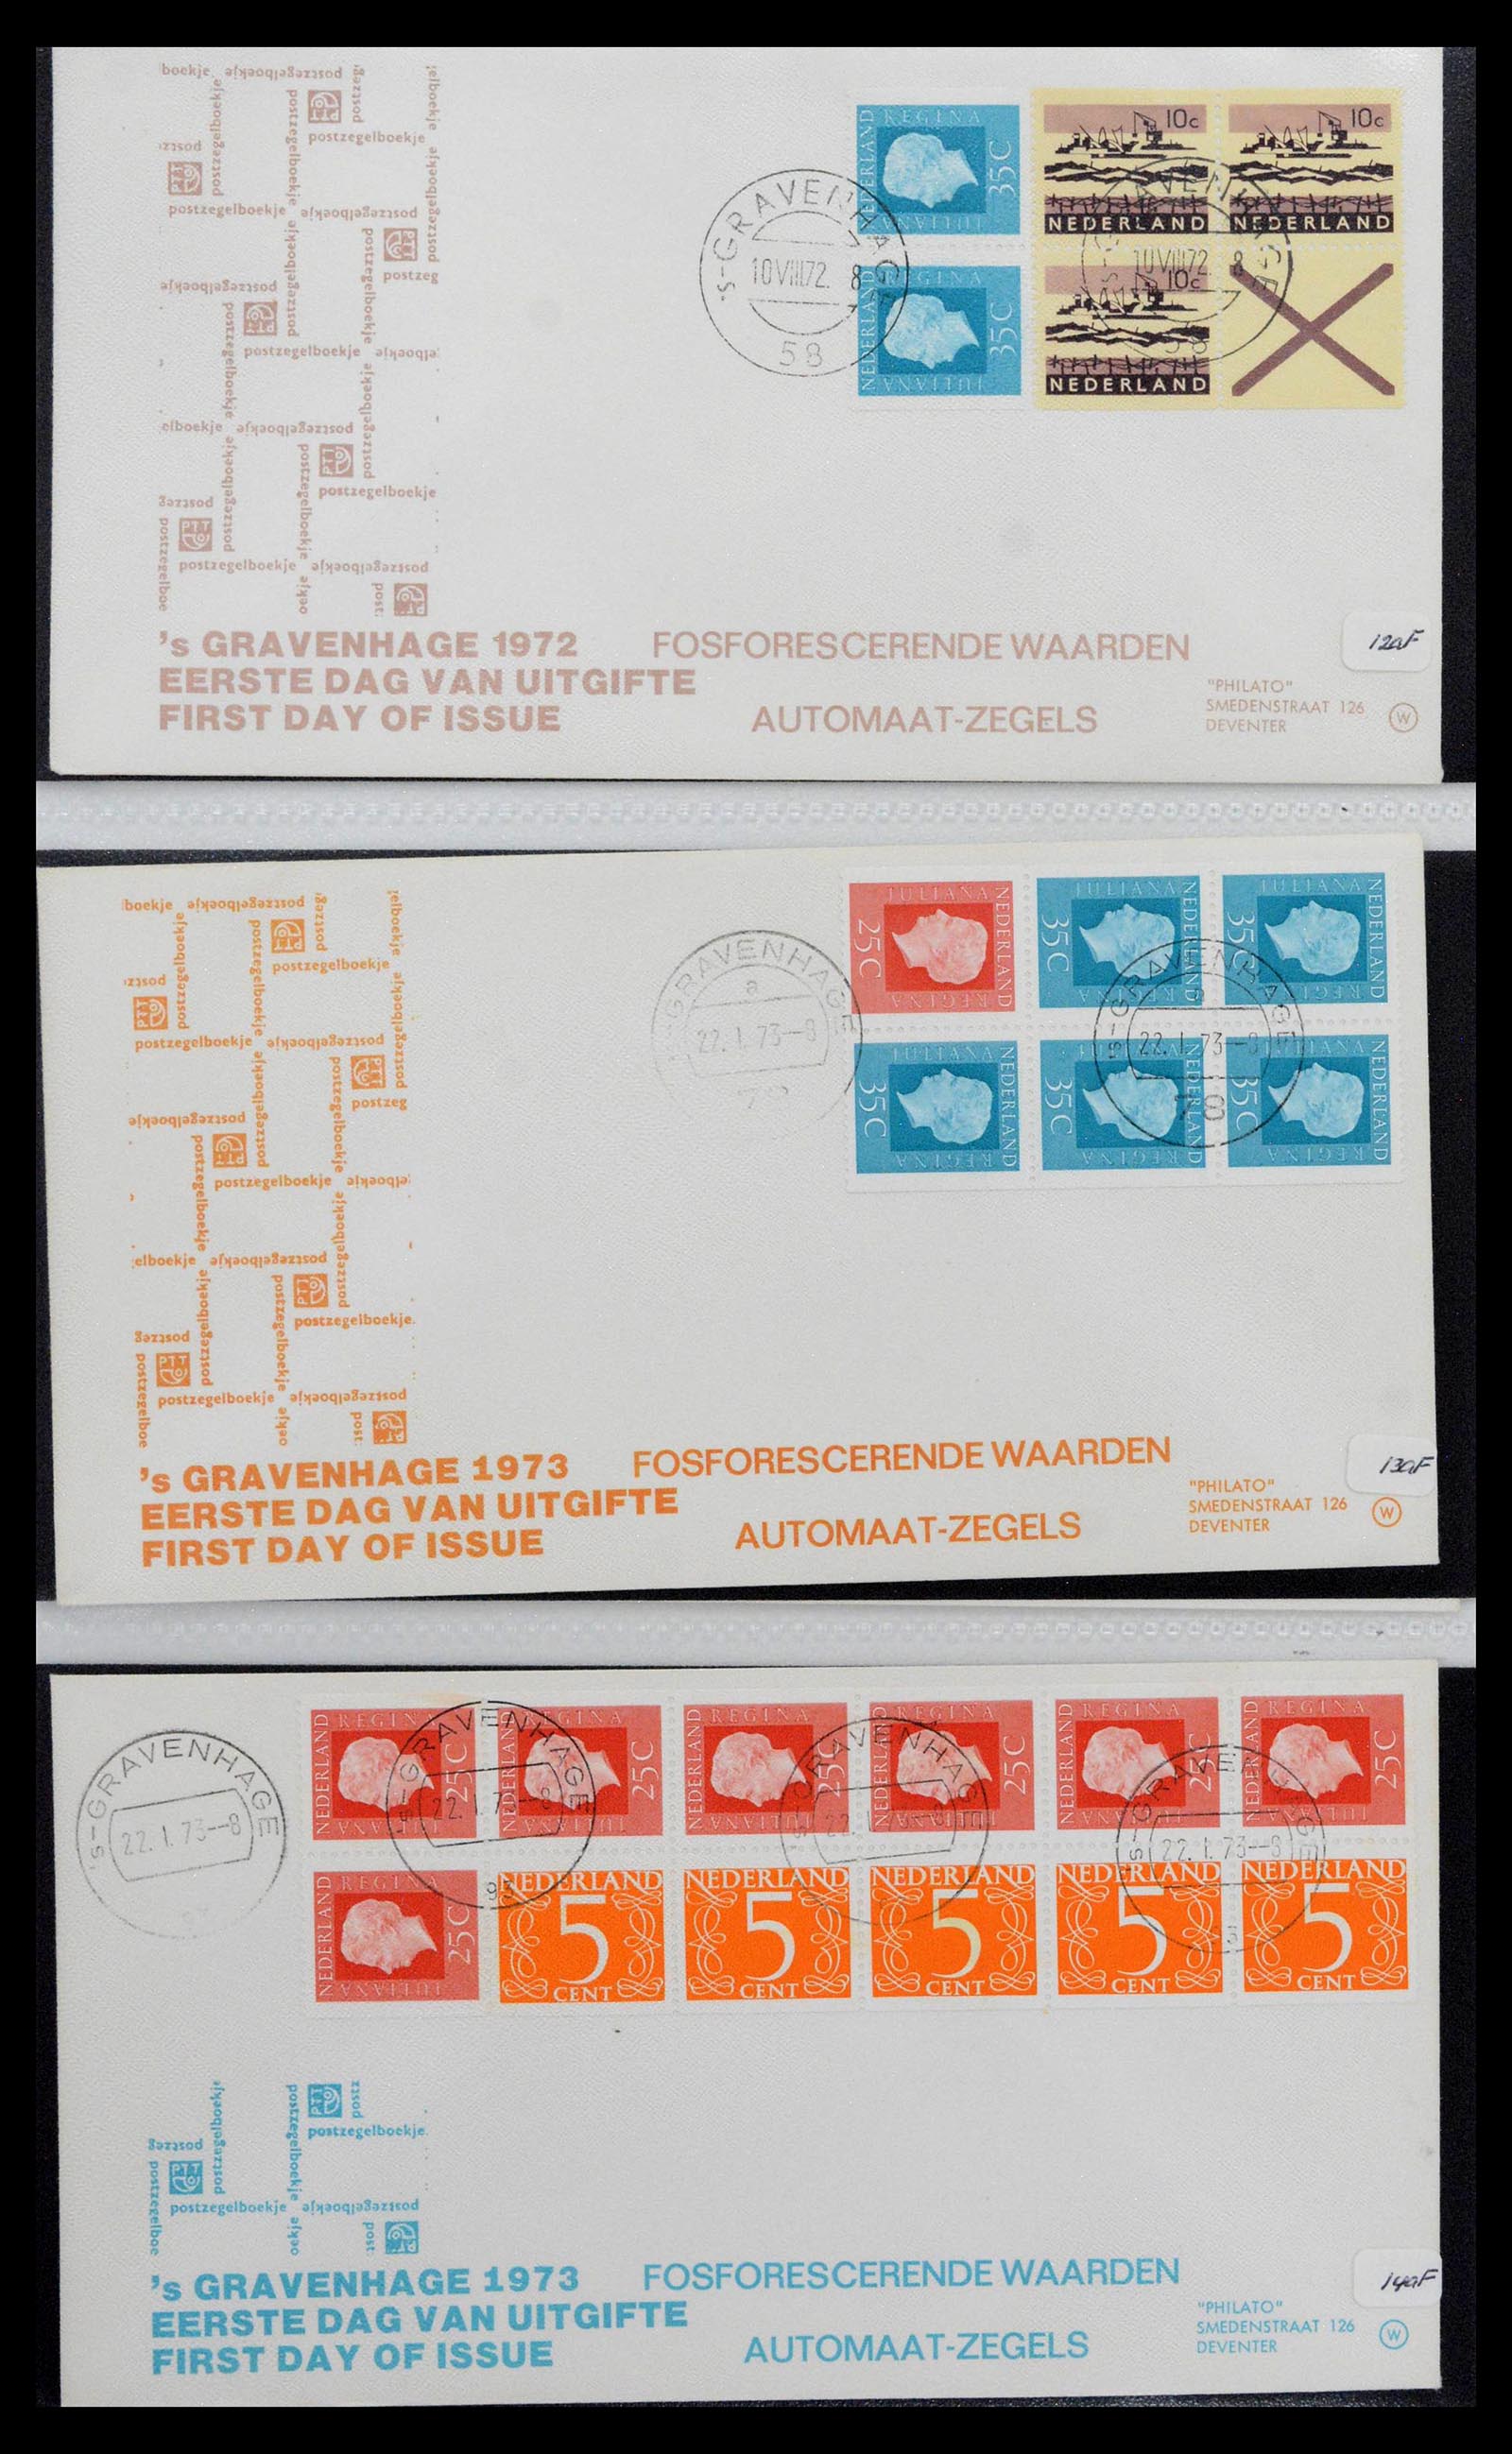 38559 0087 - Stamp collection 38559 Netherlands special first day covers.